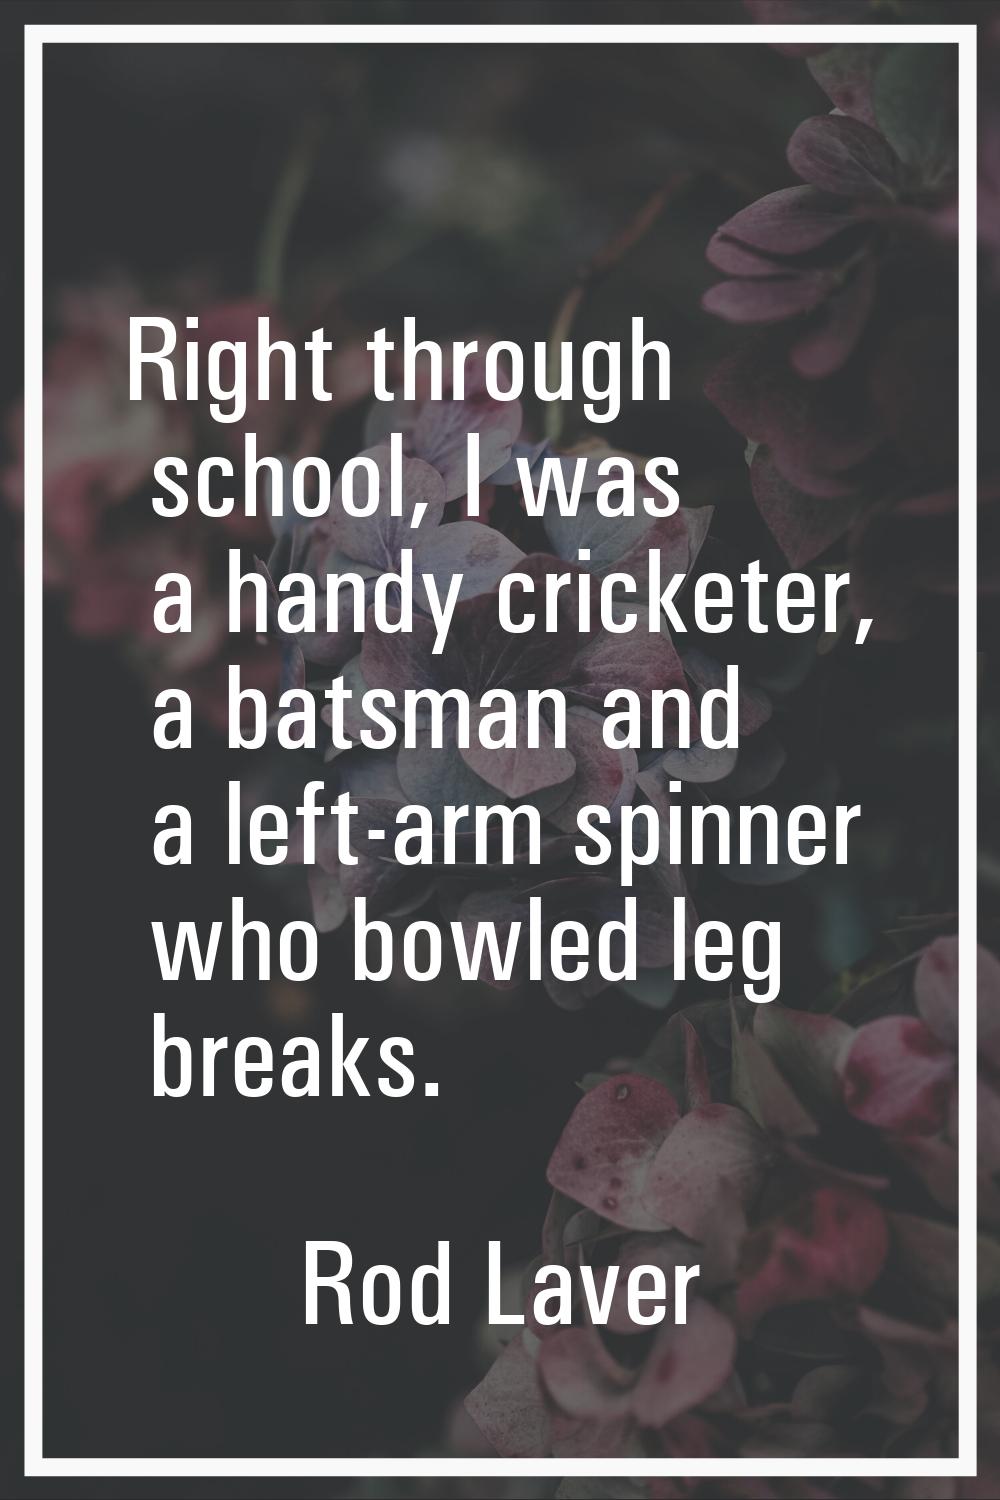 Right through school, I was a handy cricketer, a batsman and a left-arm spinner who bowled leg brea